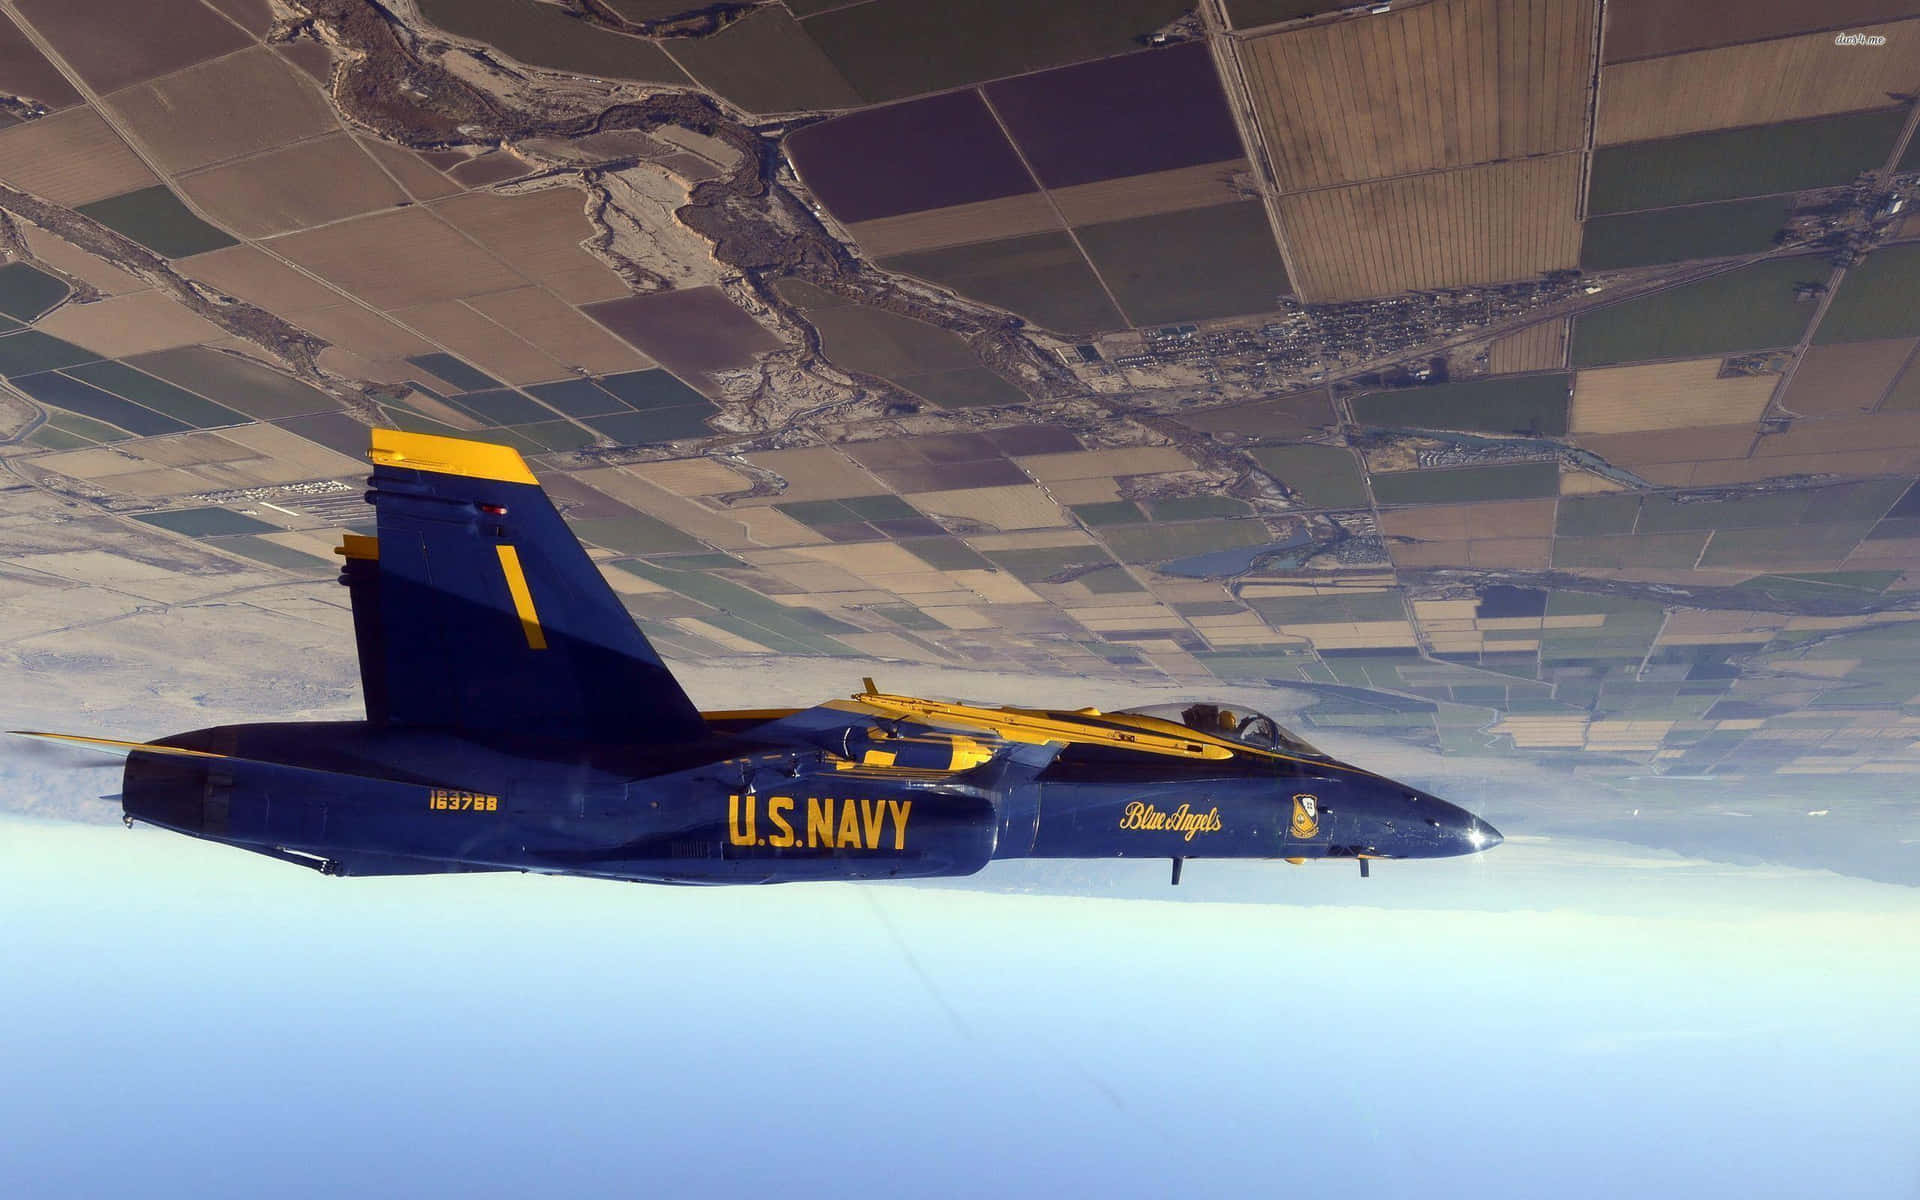 "A Blue Angels Aerial Spectacular Above California". Wallpaper